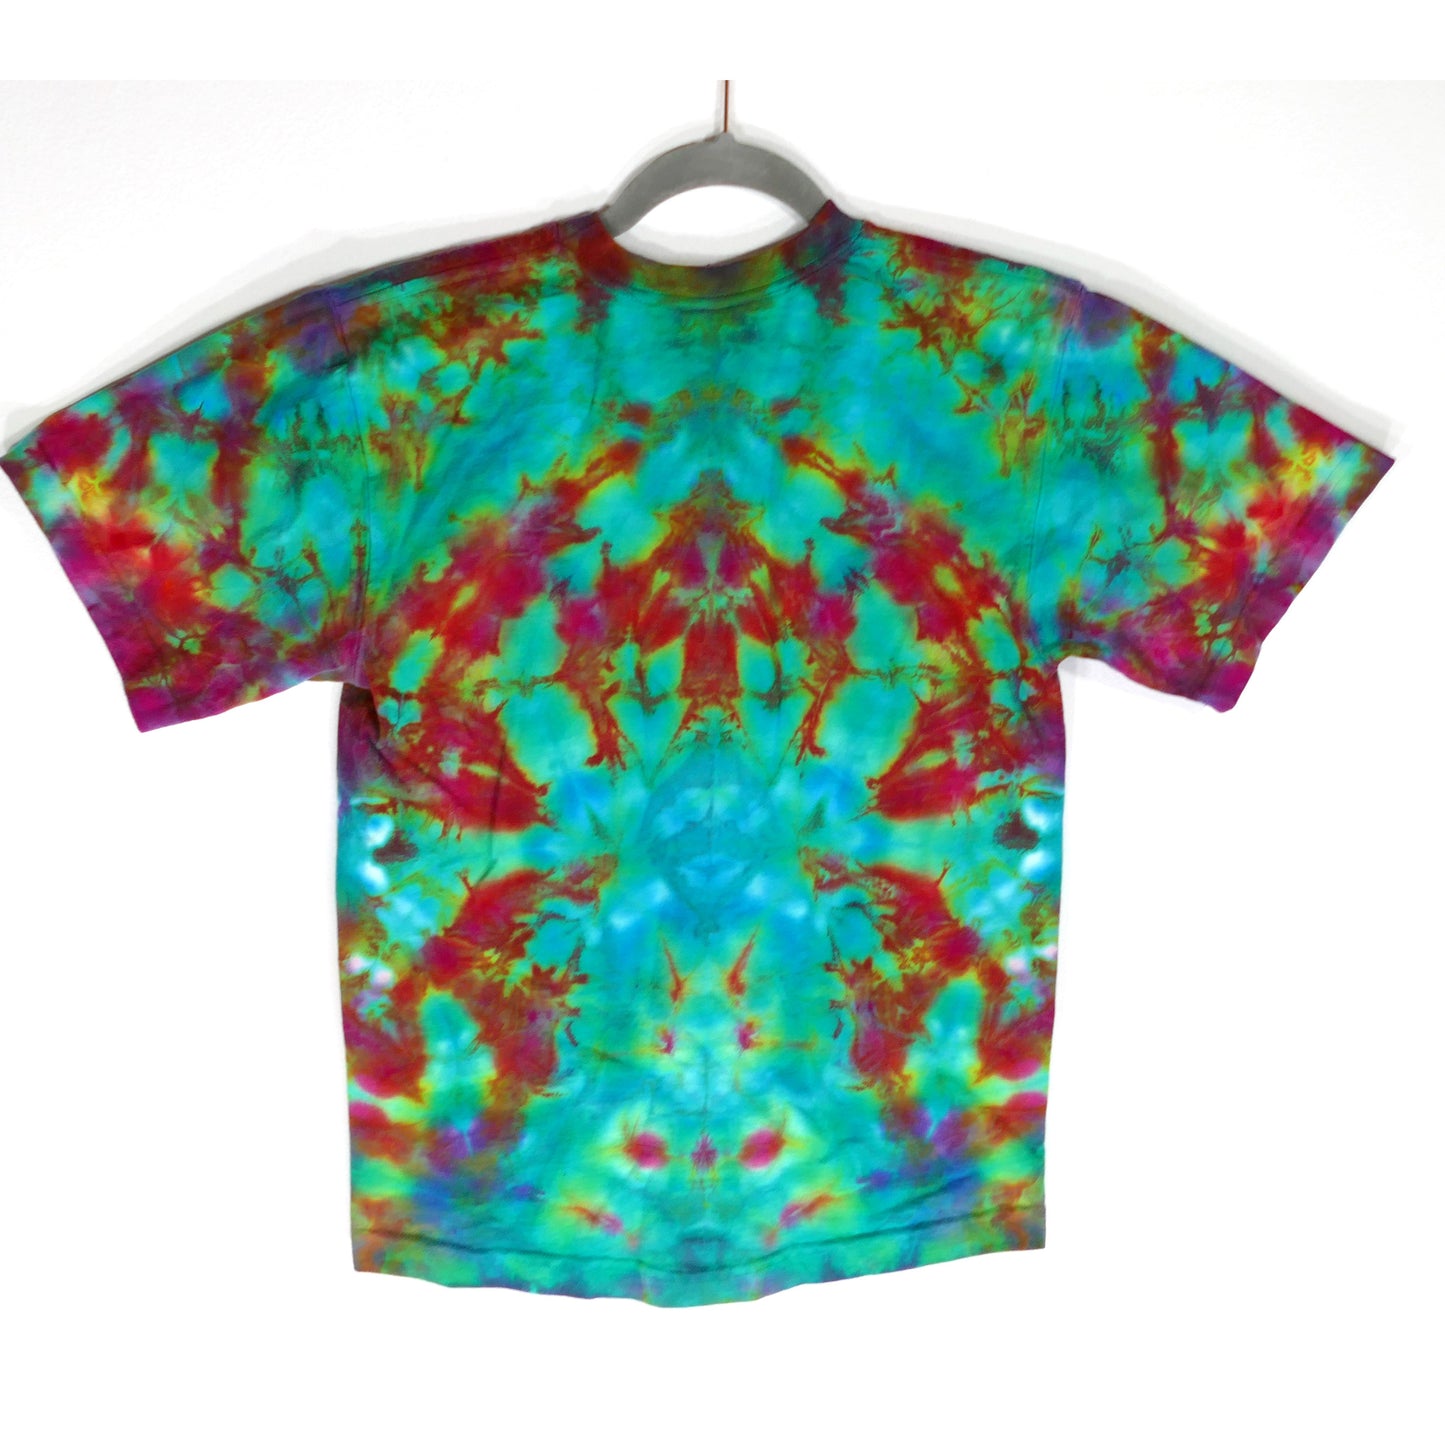 Small Camber TIE DYE T-Shirt